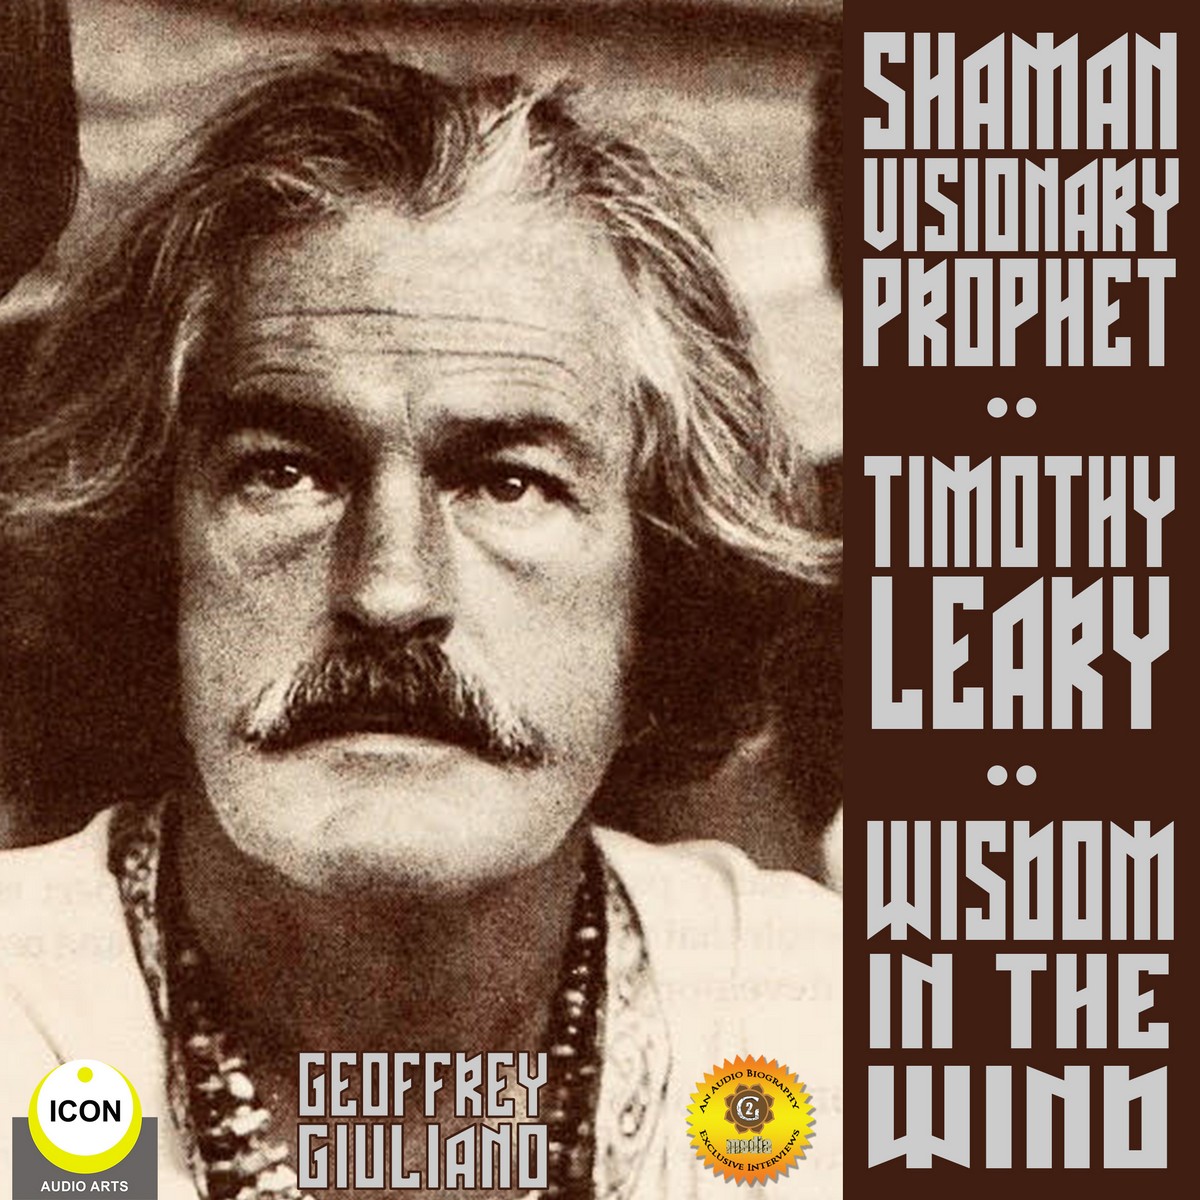 Timothy Leary Shaman Visionary Prophet – Wisdom in the Wind